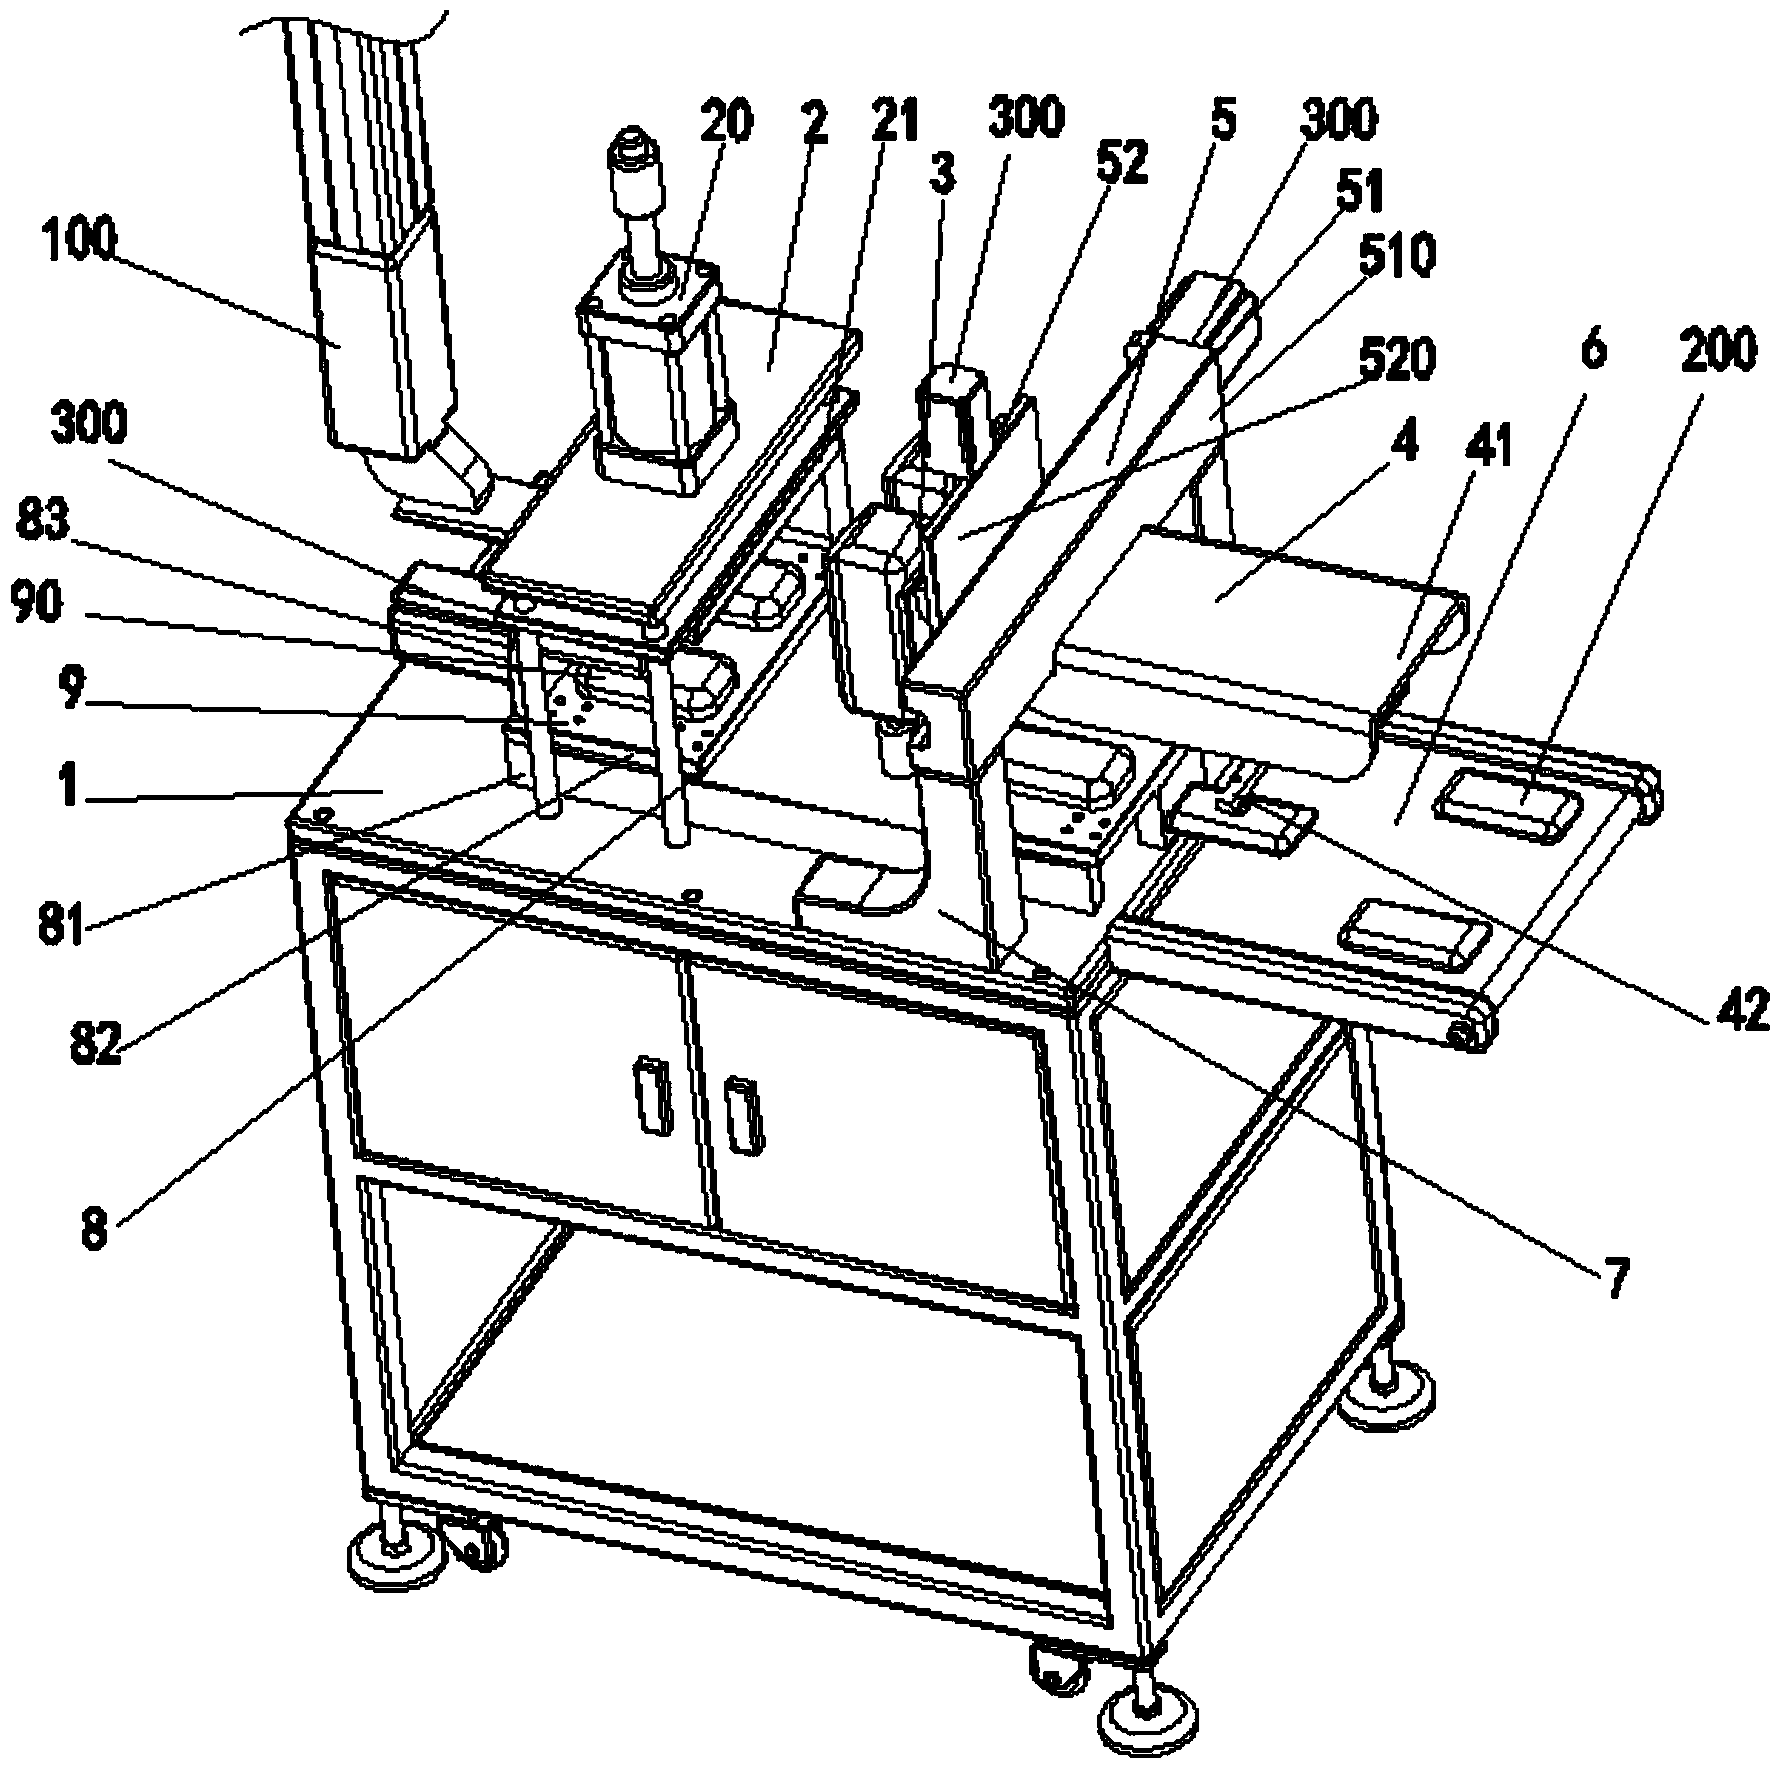 Automatic sprue cutting-away and grinding equipment for digital device shell injection molding